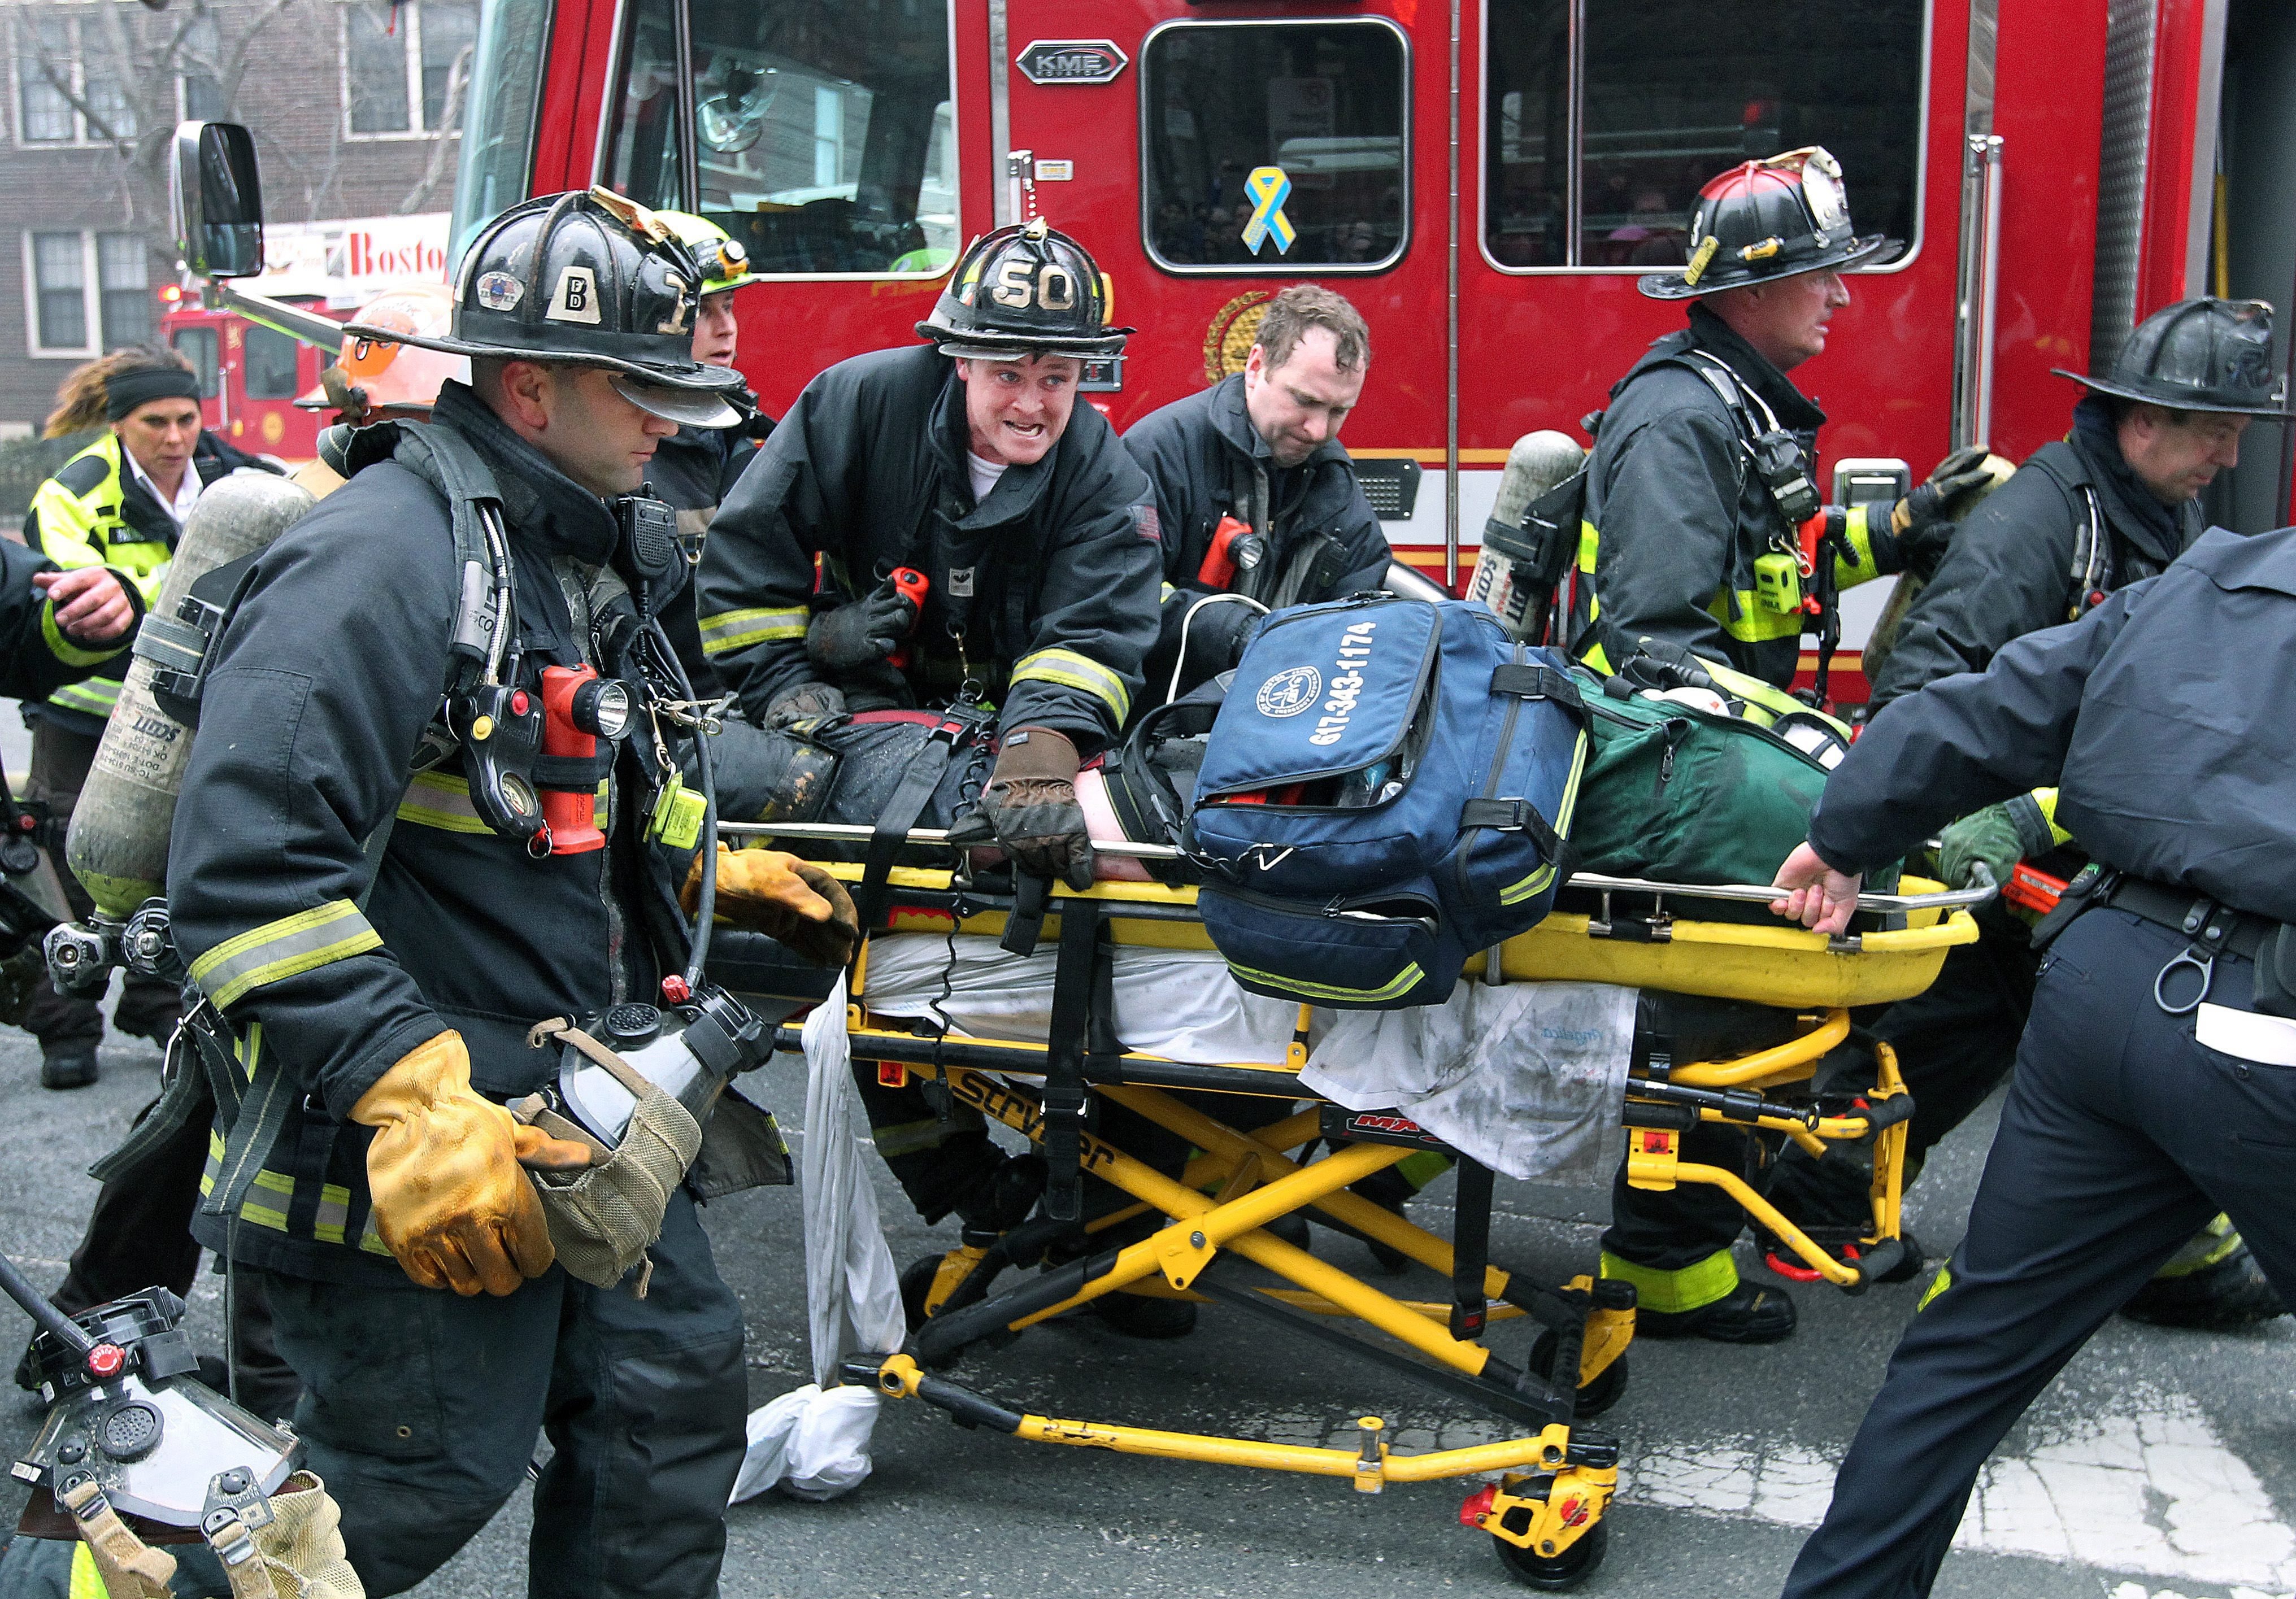 Boston Fire Department firefighters working on a fellow firefighter as he is rushed to an ambulance after being injured during a nine alarm fire in the Back Bay neighborhood of Boston, March 26, 2014.